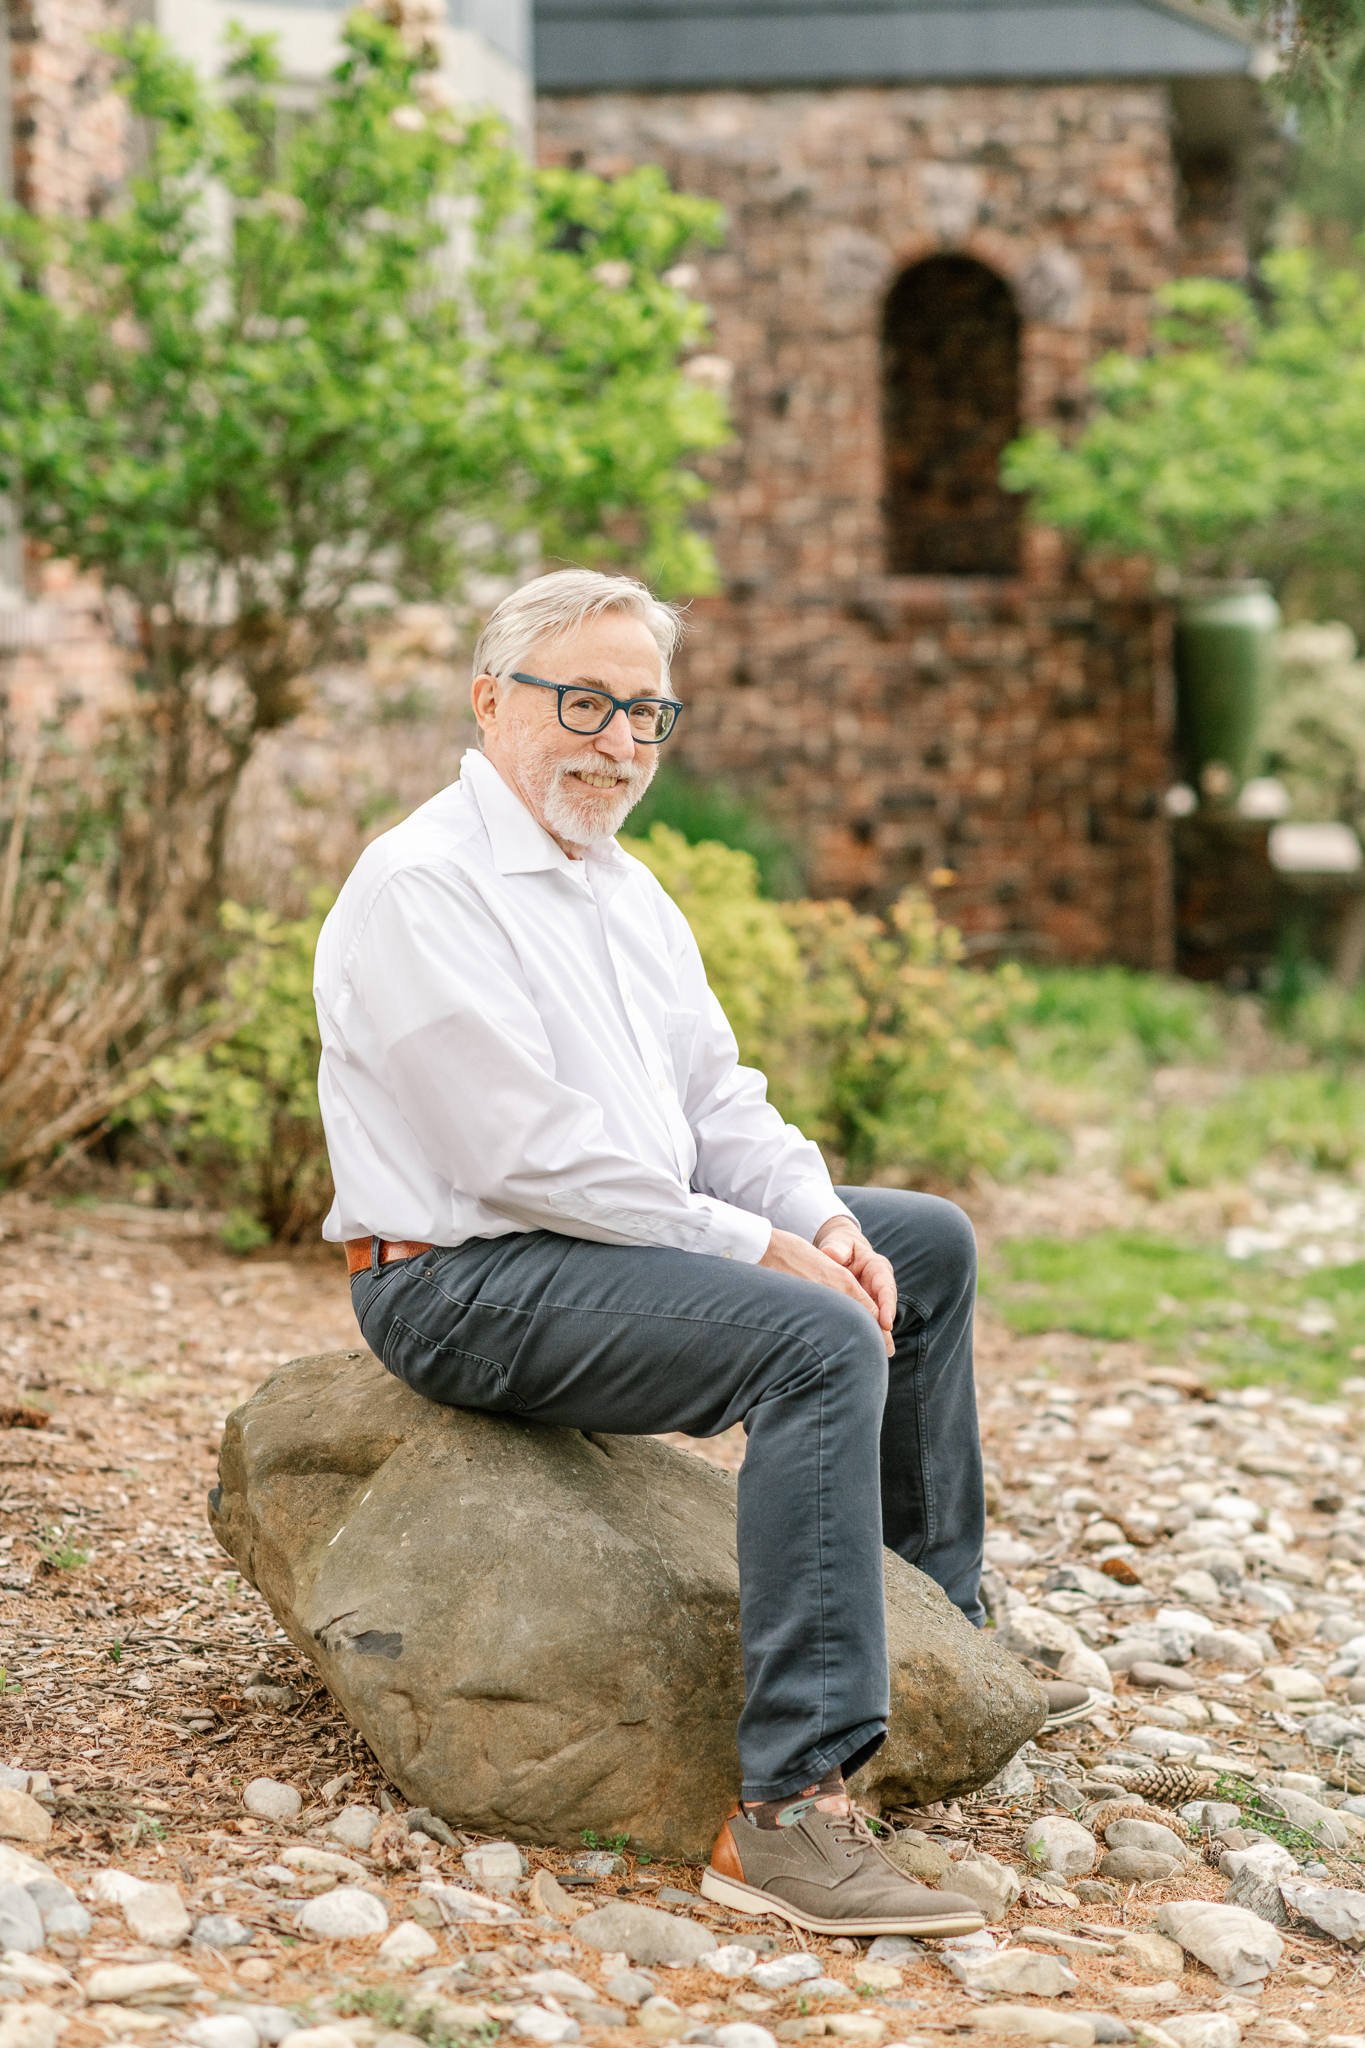  East Coast family photographer Nicole Hawkins photography captures a grandpa sitting on a rock in a beautifully landscaped yard. grandfather portrait #NicoleHawkinsPhotography #NicoleHawkinsfamilies #AtHomePortraits #EastCoastFamilyPhotographer #New